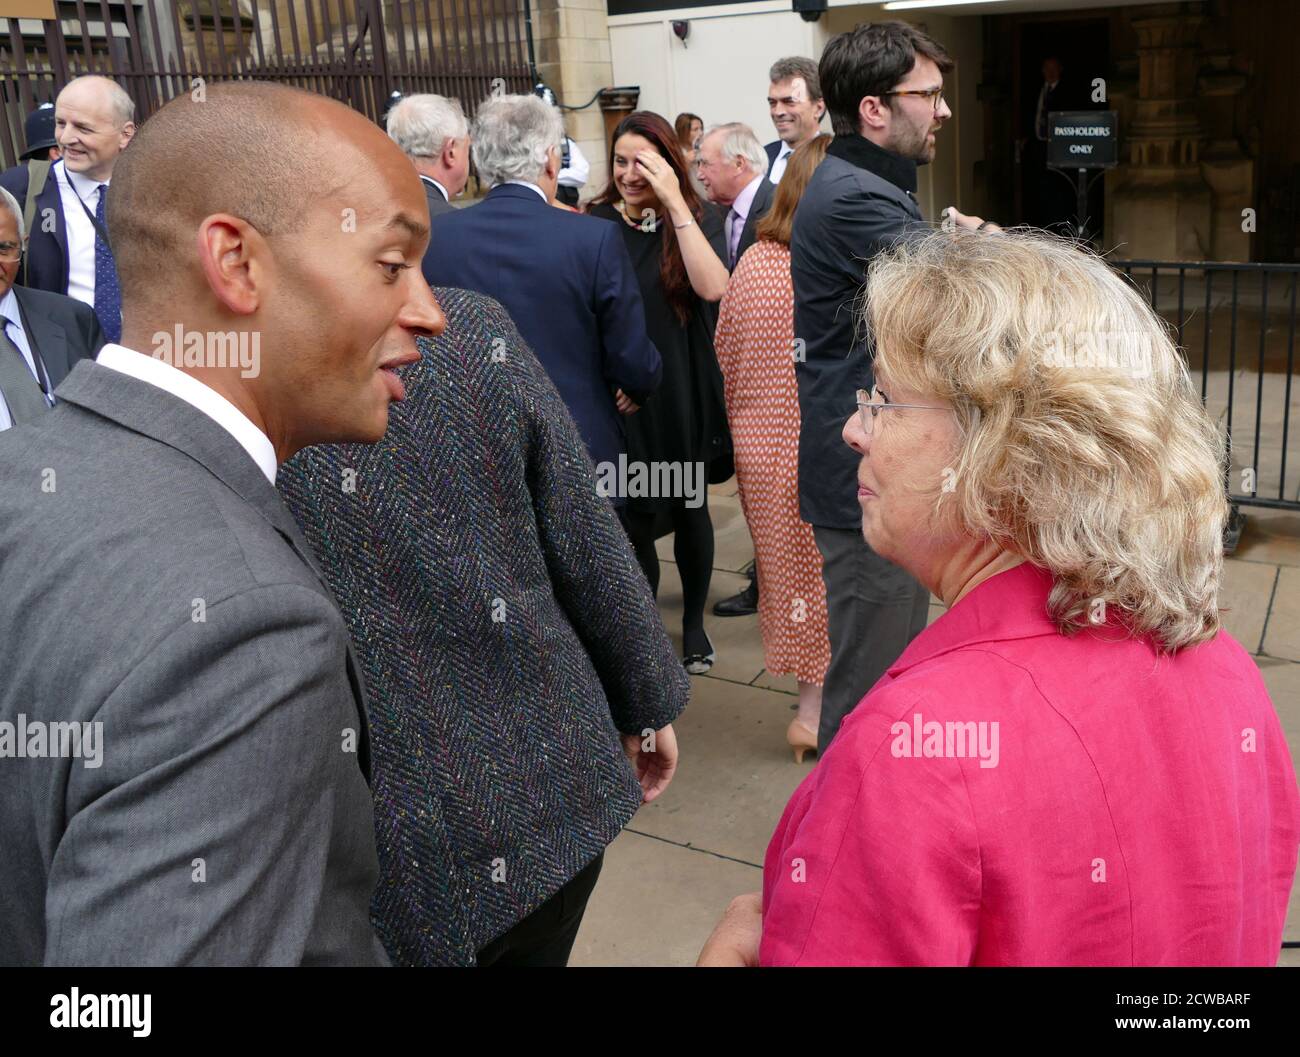 Baroness Northover and Chuka Umunna enter parliament after the prorogation was annulled by the Supreme Court. 25th September 2019 Lindsay Patricia Northover, Baroness Northover, is a British Liberal Democrat politician, member of the House of Lords, and former junior government minister. Chuka Umunna (born 1978), British Liberal Democrat politician serving as Member of Parliament (MP) for Streatham since 2010, elected as the Labour Party candidate. As a former member of the Opposition Shadow Cabinet, he was Shadow Business Secretary from 2011 to 2015. He was a member of the Labour Party until Stock Photo